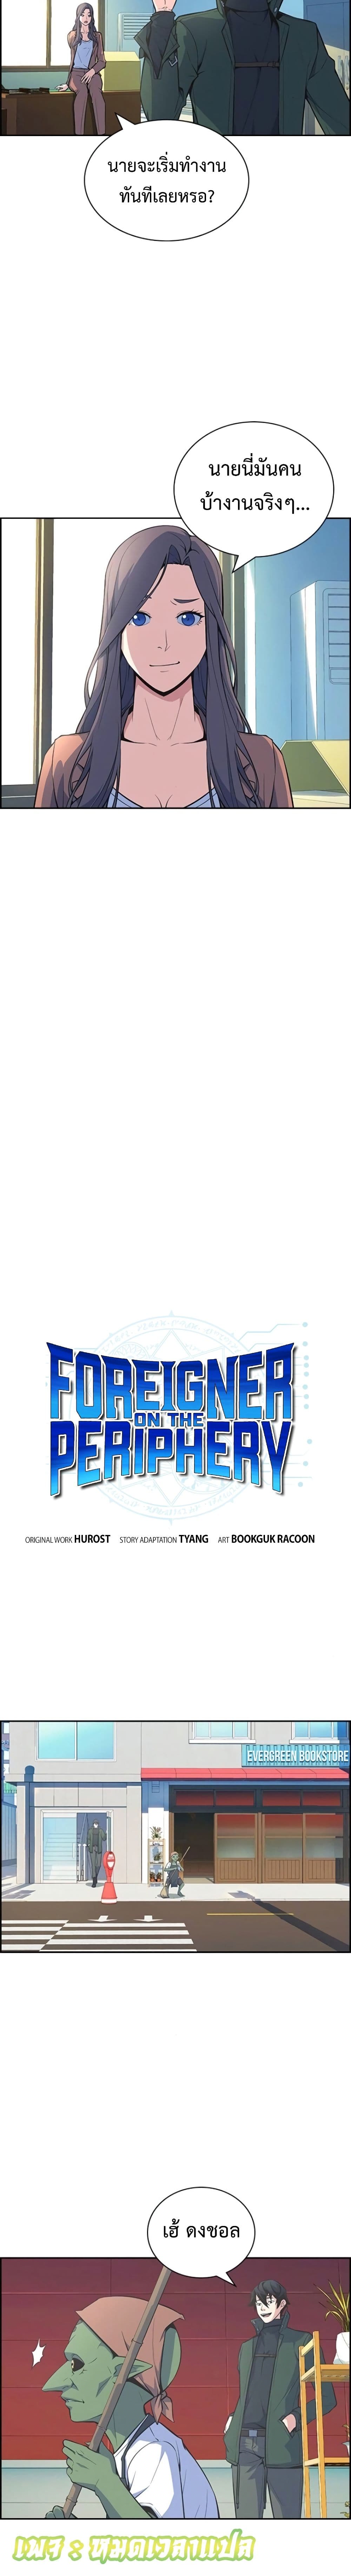 Foreigner on the Periphery 3-3